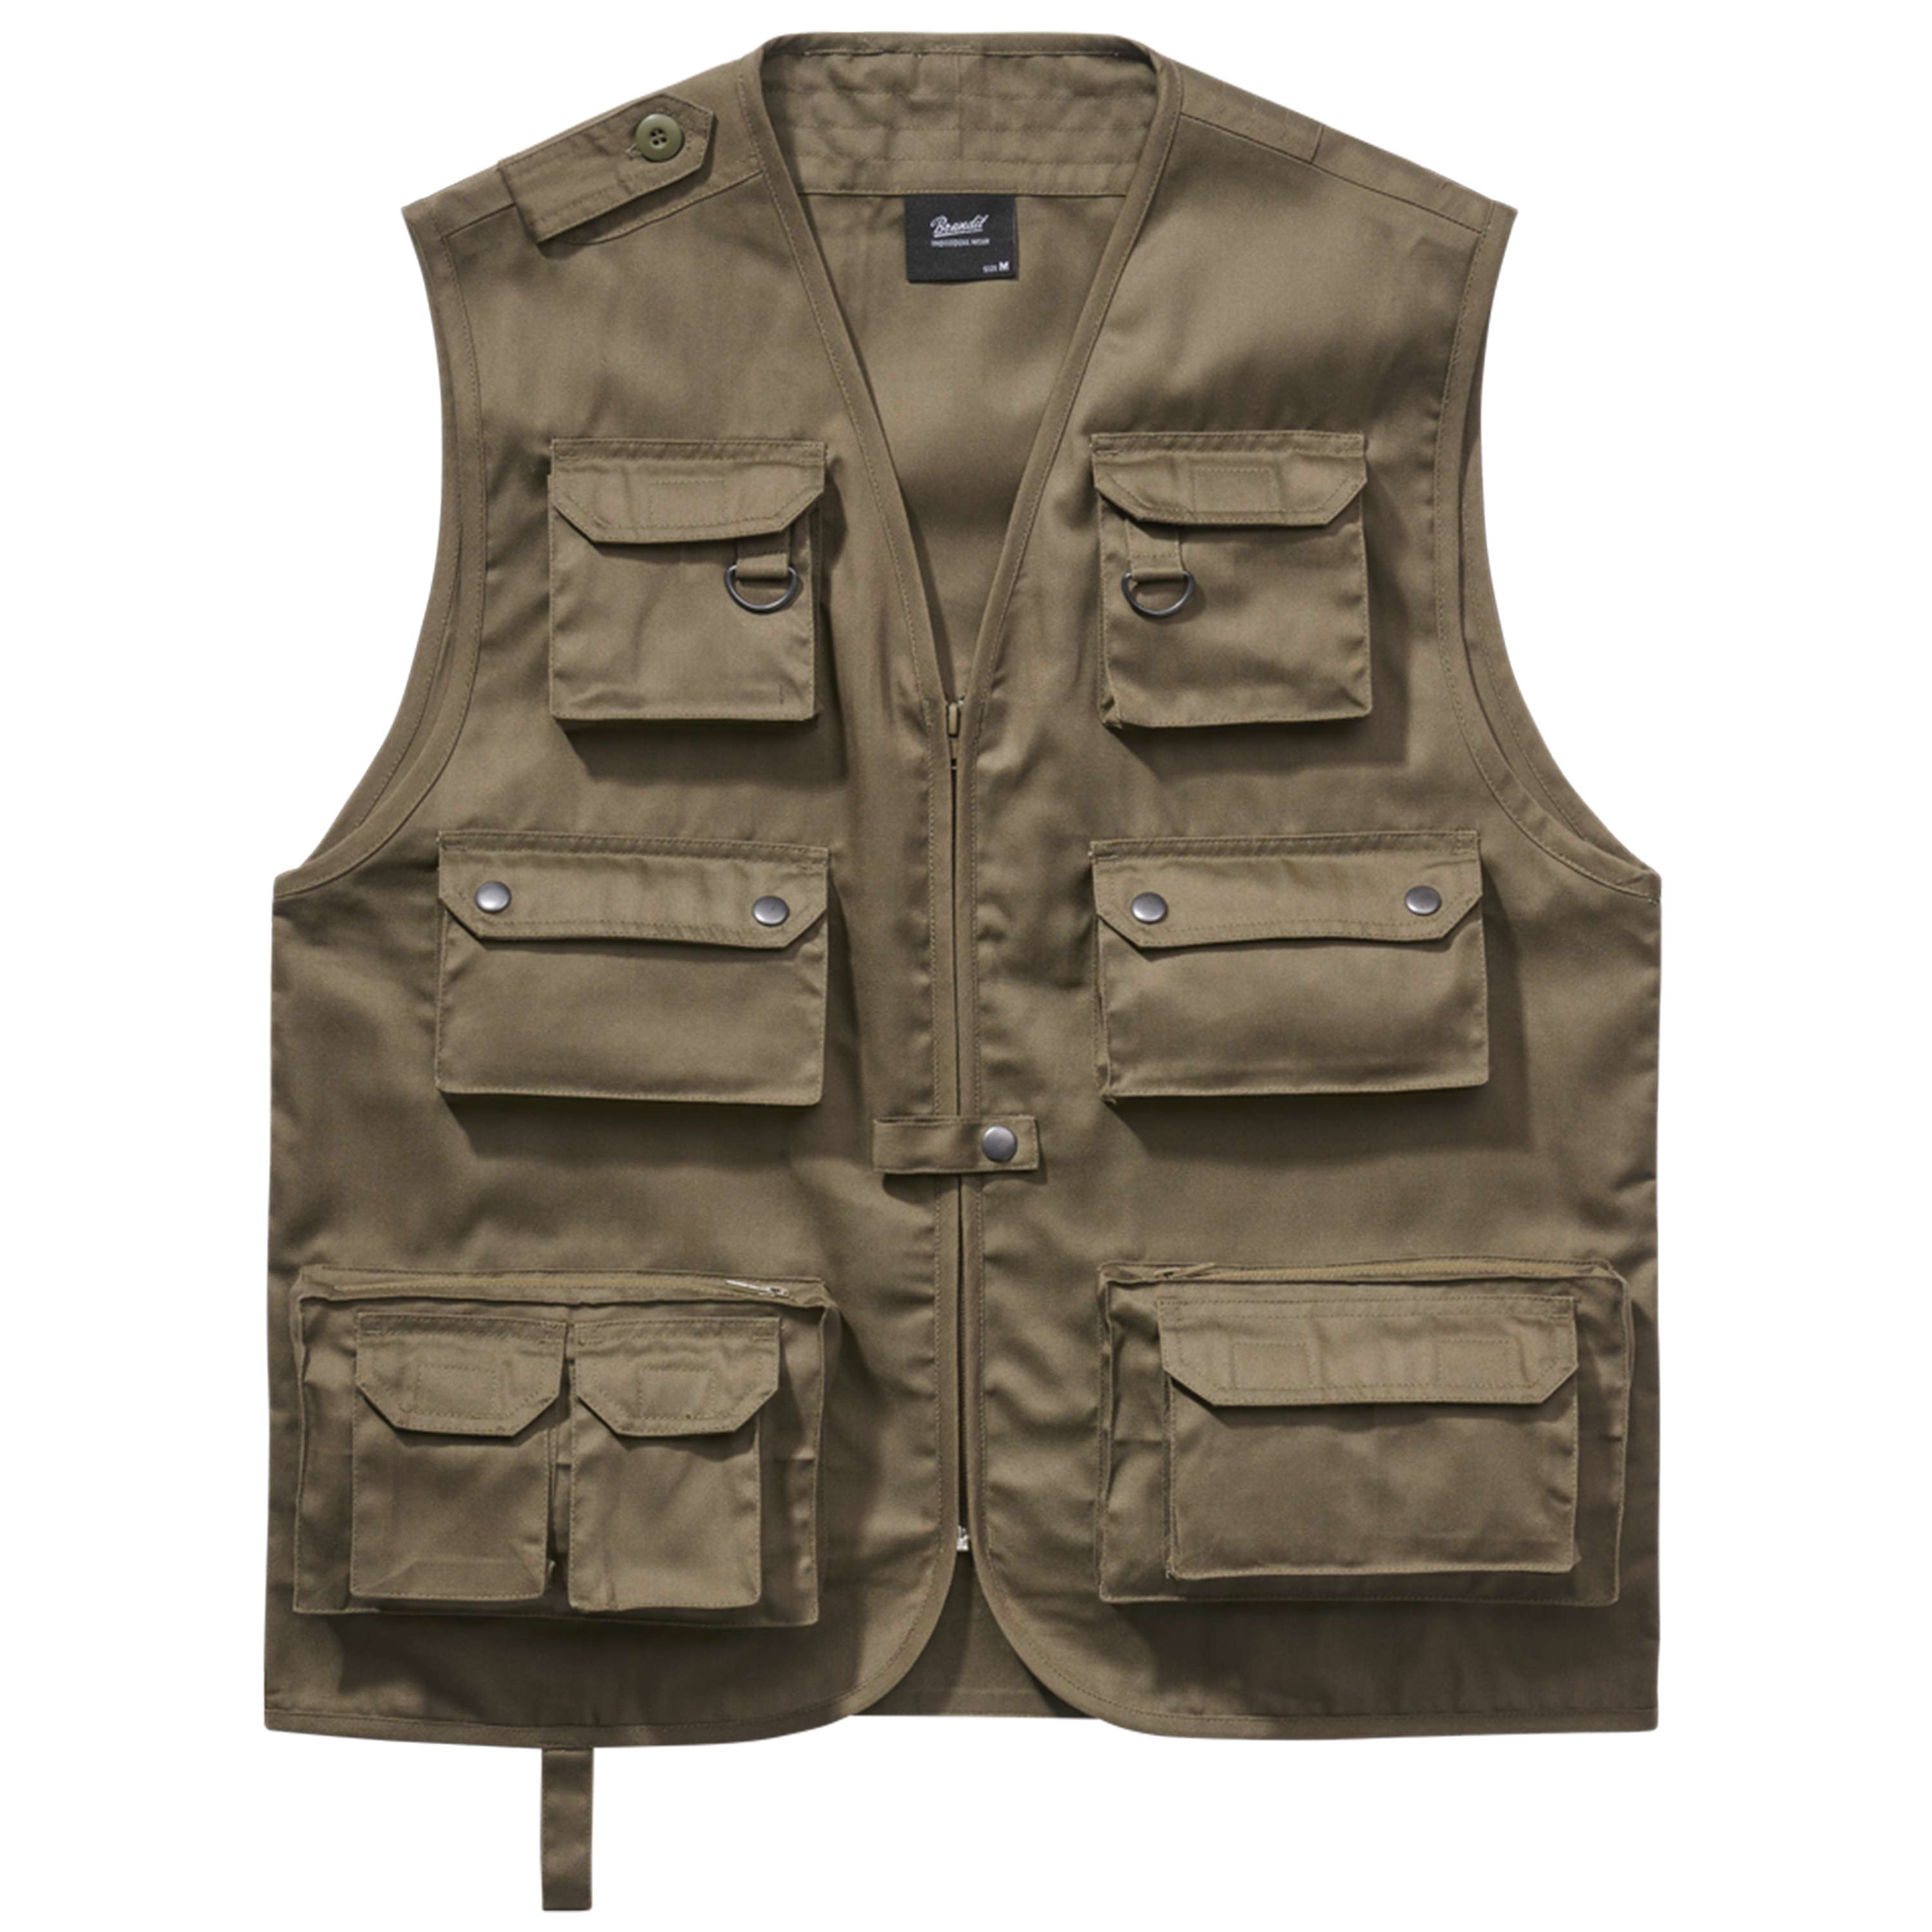 Purchase the Brandit ASMC Vest by Hunting olive